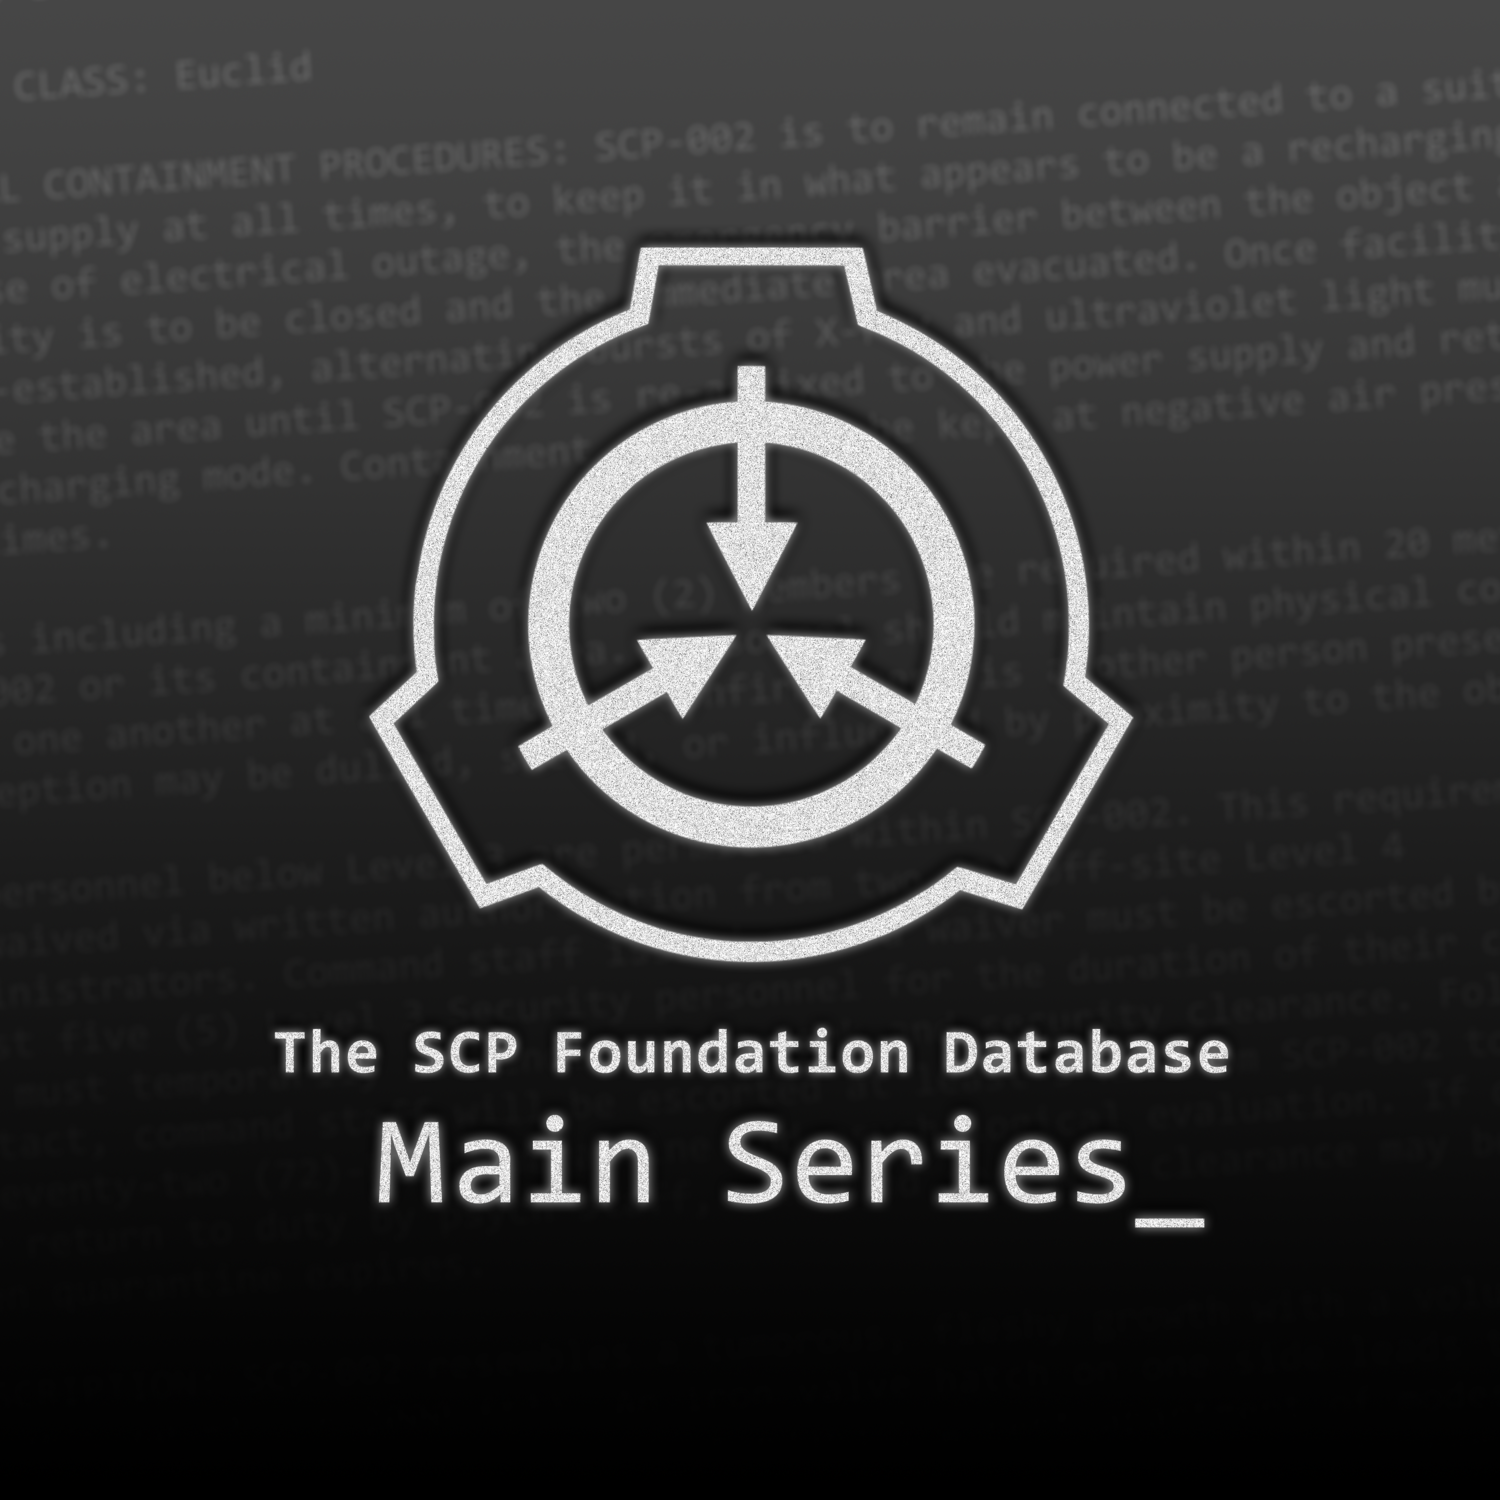 Physical Documents - SCP Foundation